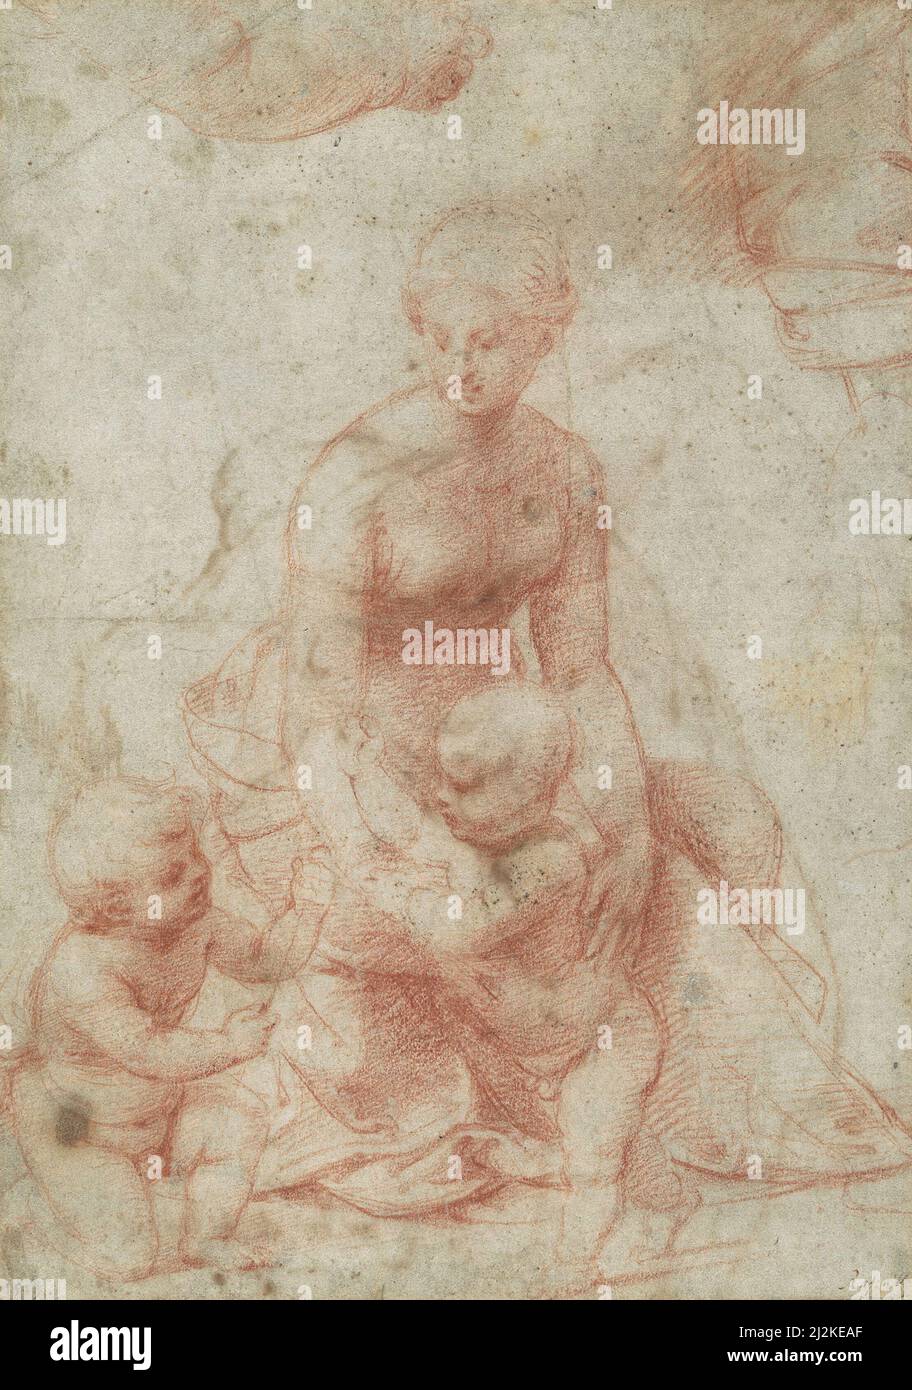 Raphael - Madonna and Child with the Infant Saint John the Baptist; upper left, Study for the Right Arm of the Infant Saint John. etc. C 1506. Stock Photo